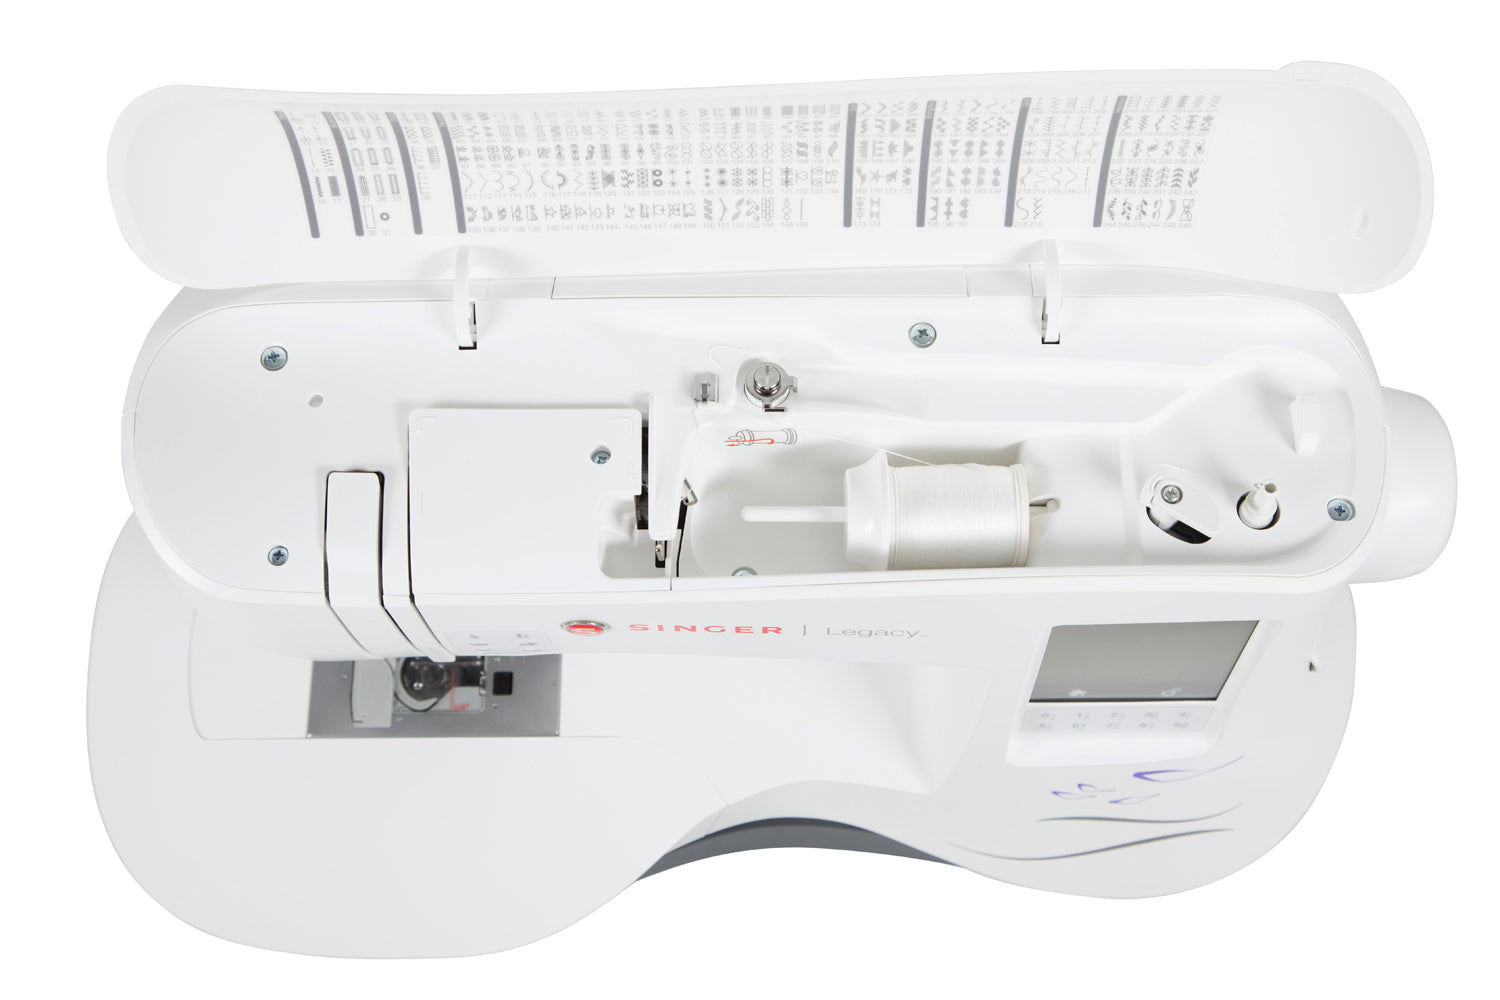 Singer Legacy SE300 - Sewing & Embroidery Machine